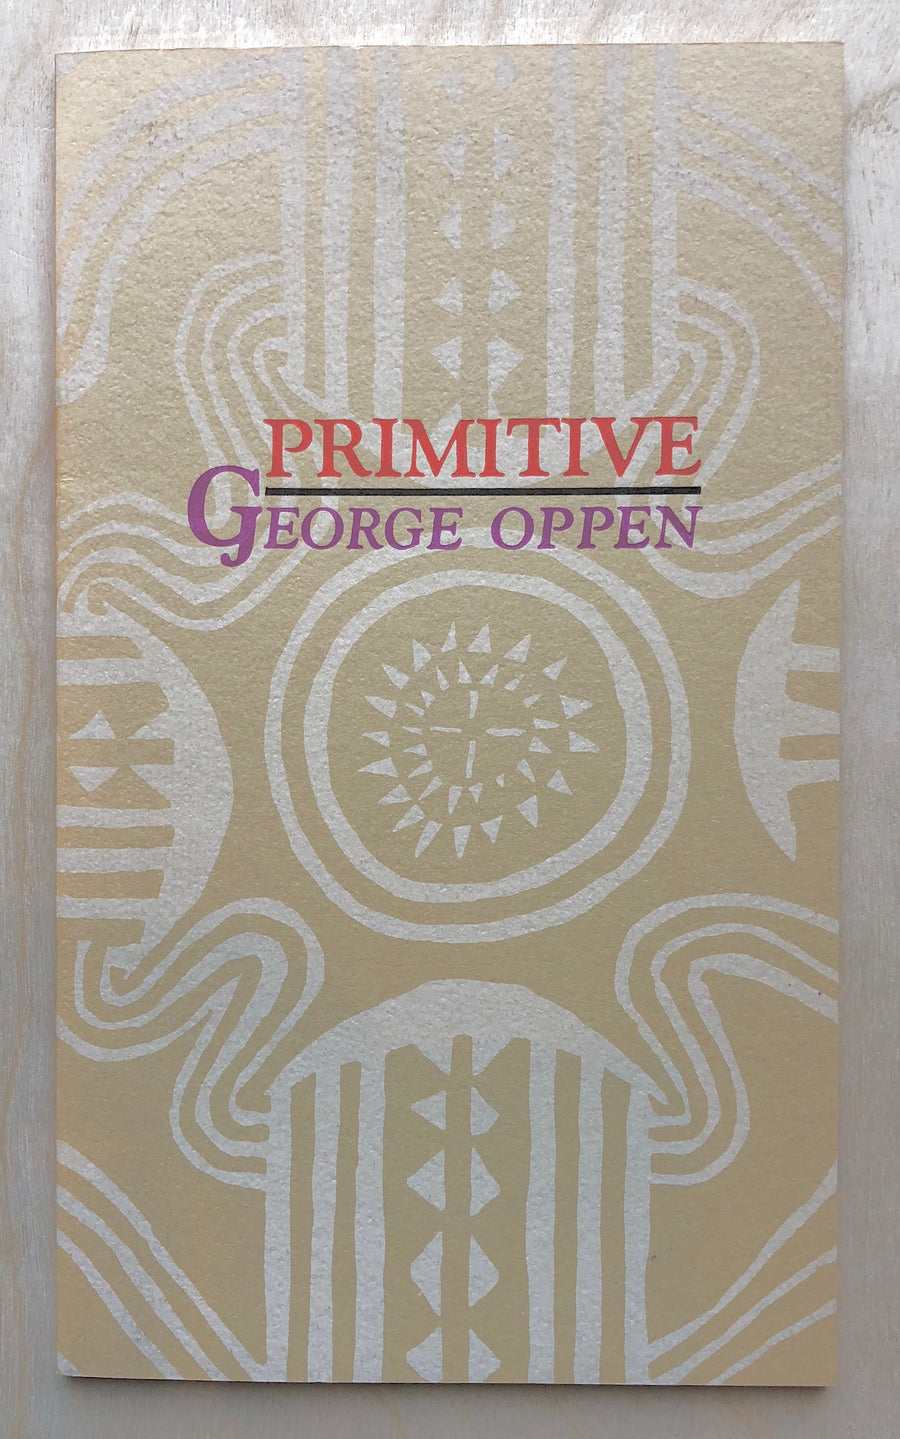 PRIMITIVE by George Oppen